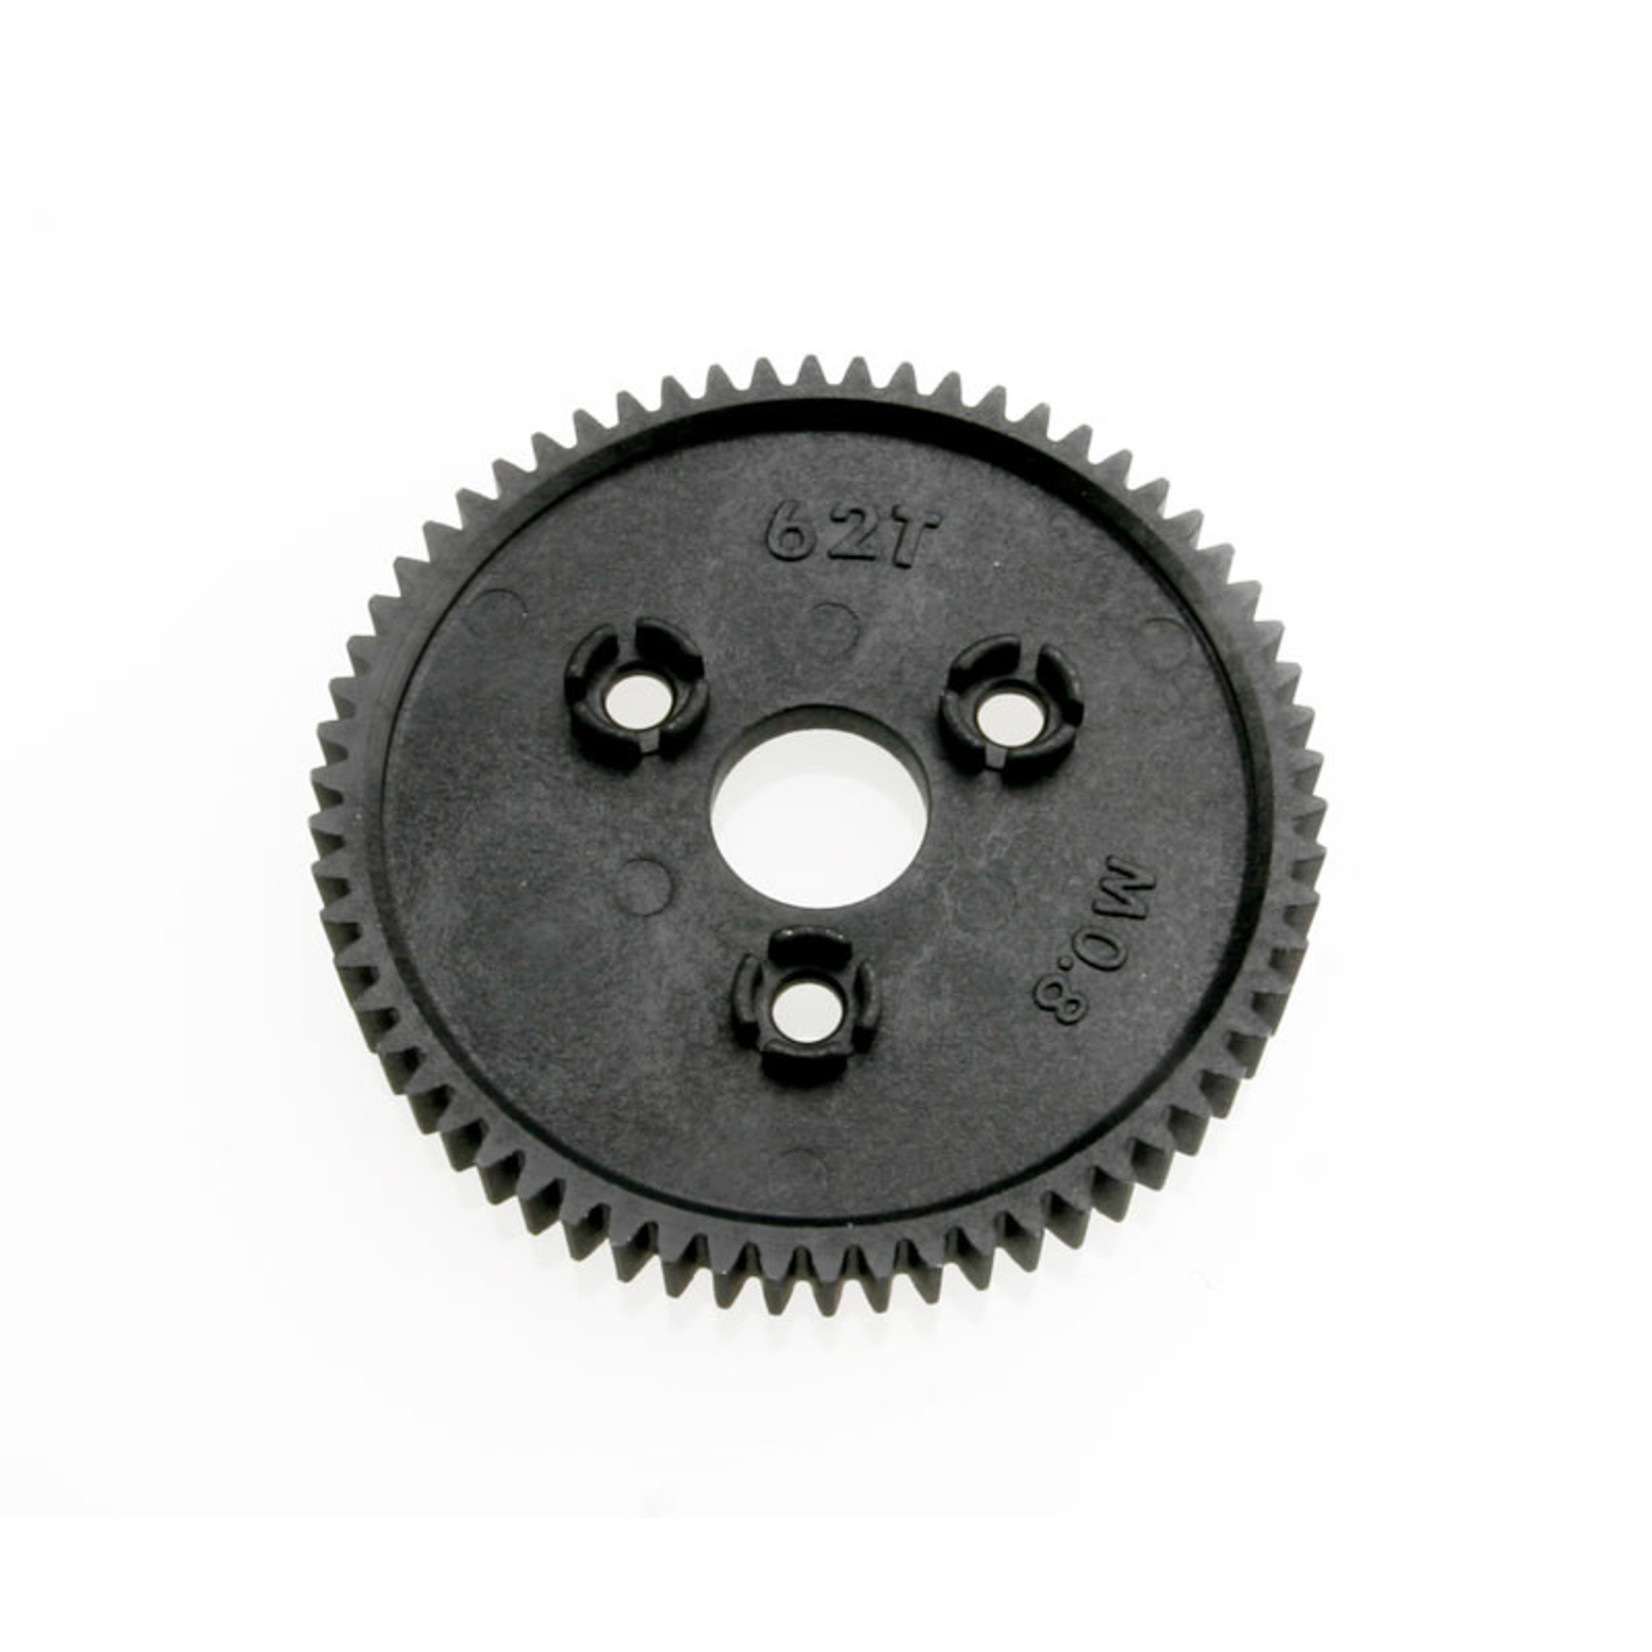 Traxxas 3959 - Spur gear, 62-tooth (0.8 metric pitch, comp